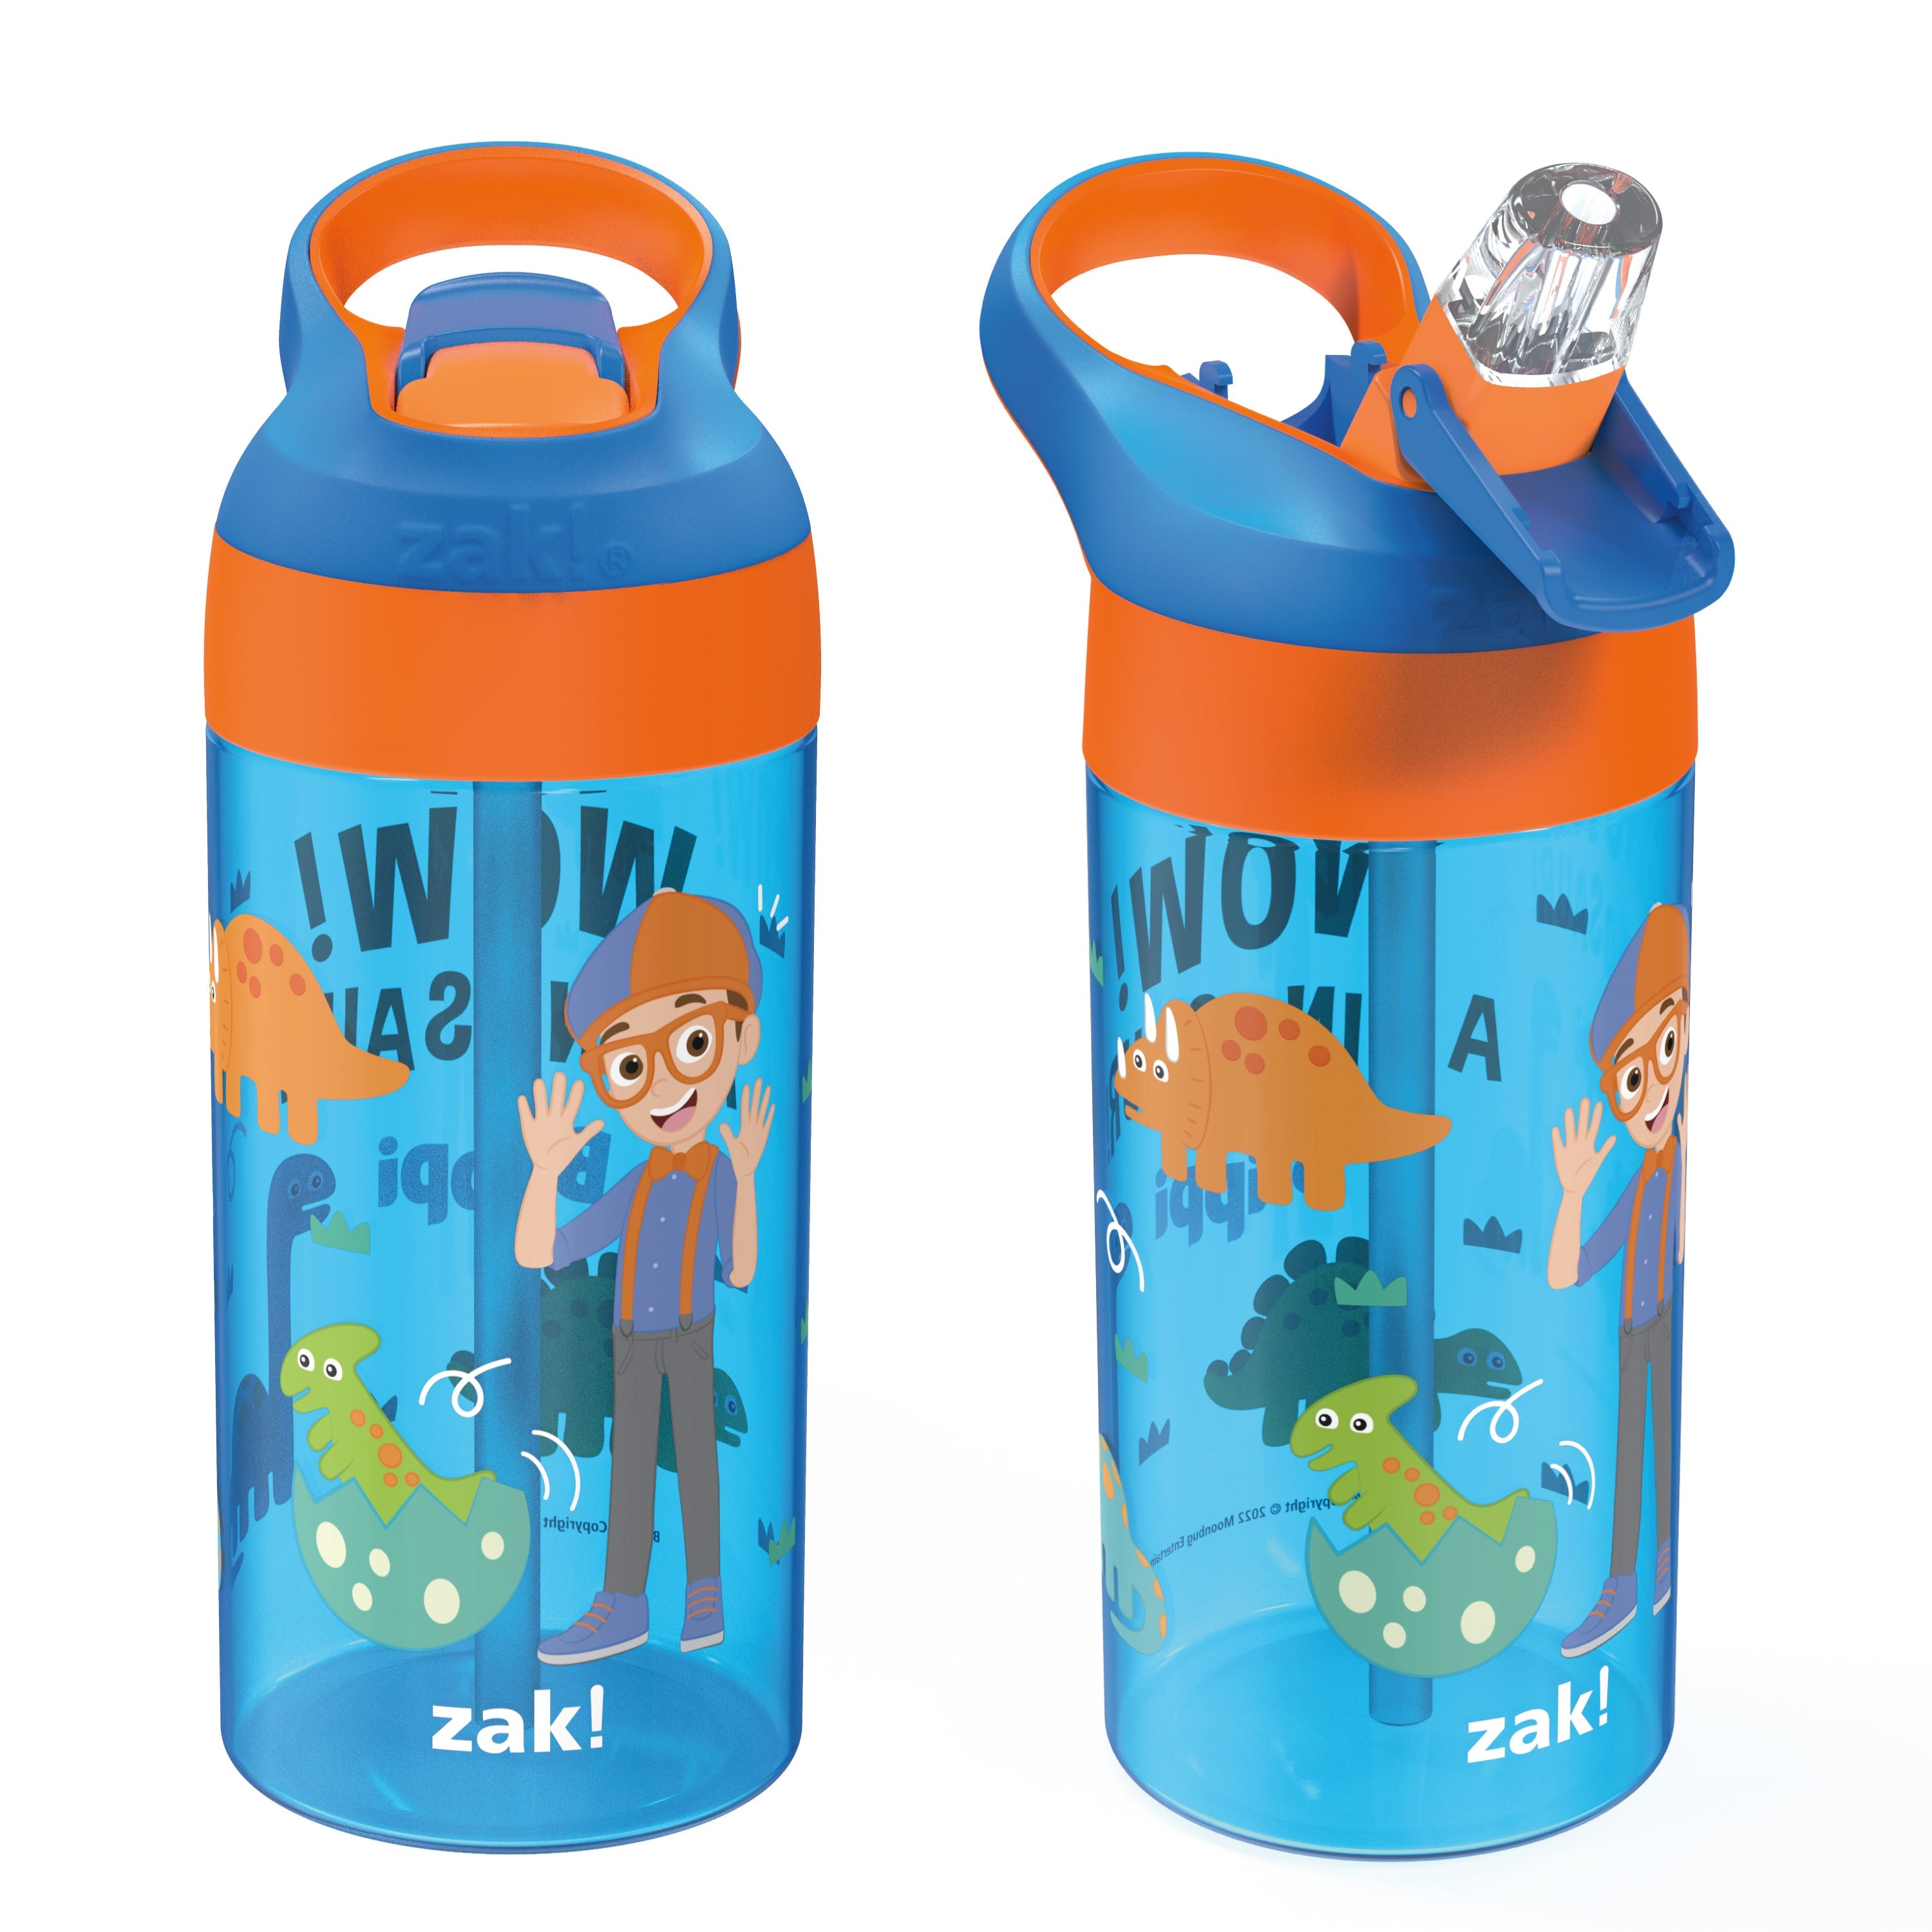 Zak Designs Blippi 14 oz Double Wall Vacuum Insulated Thermal Kids Water Bottle, 18/8 Stainless Steel, FlipUp Straw Spout, Locking Spout Cover